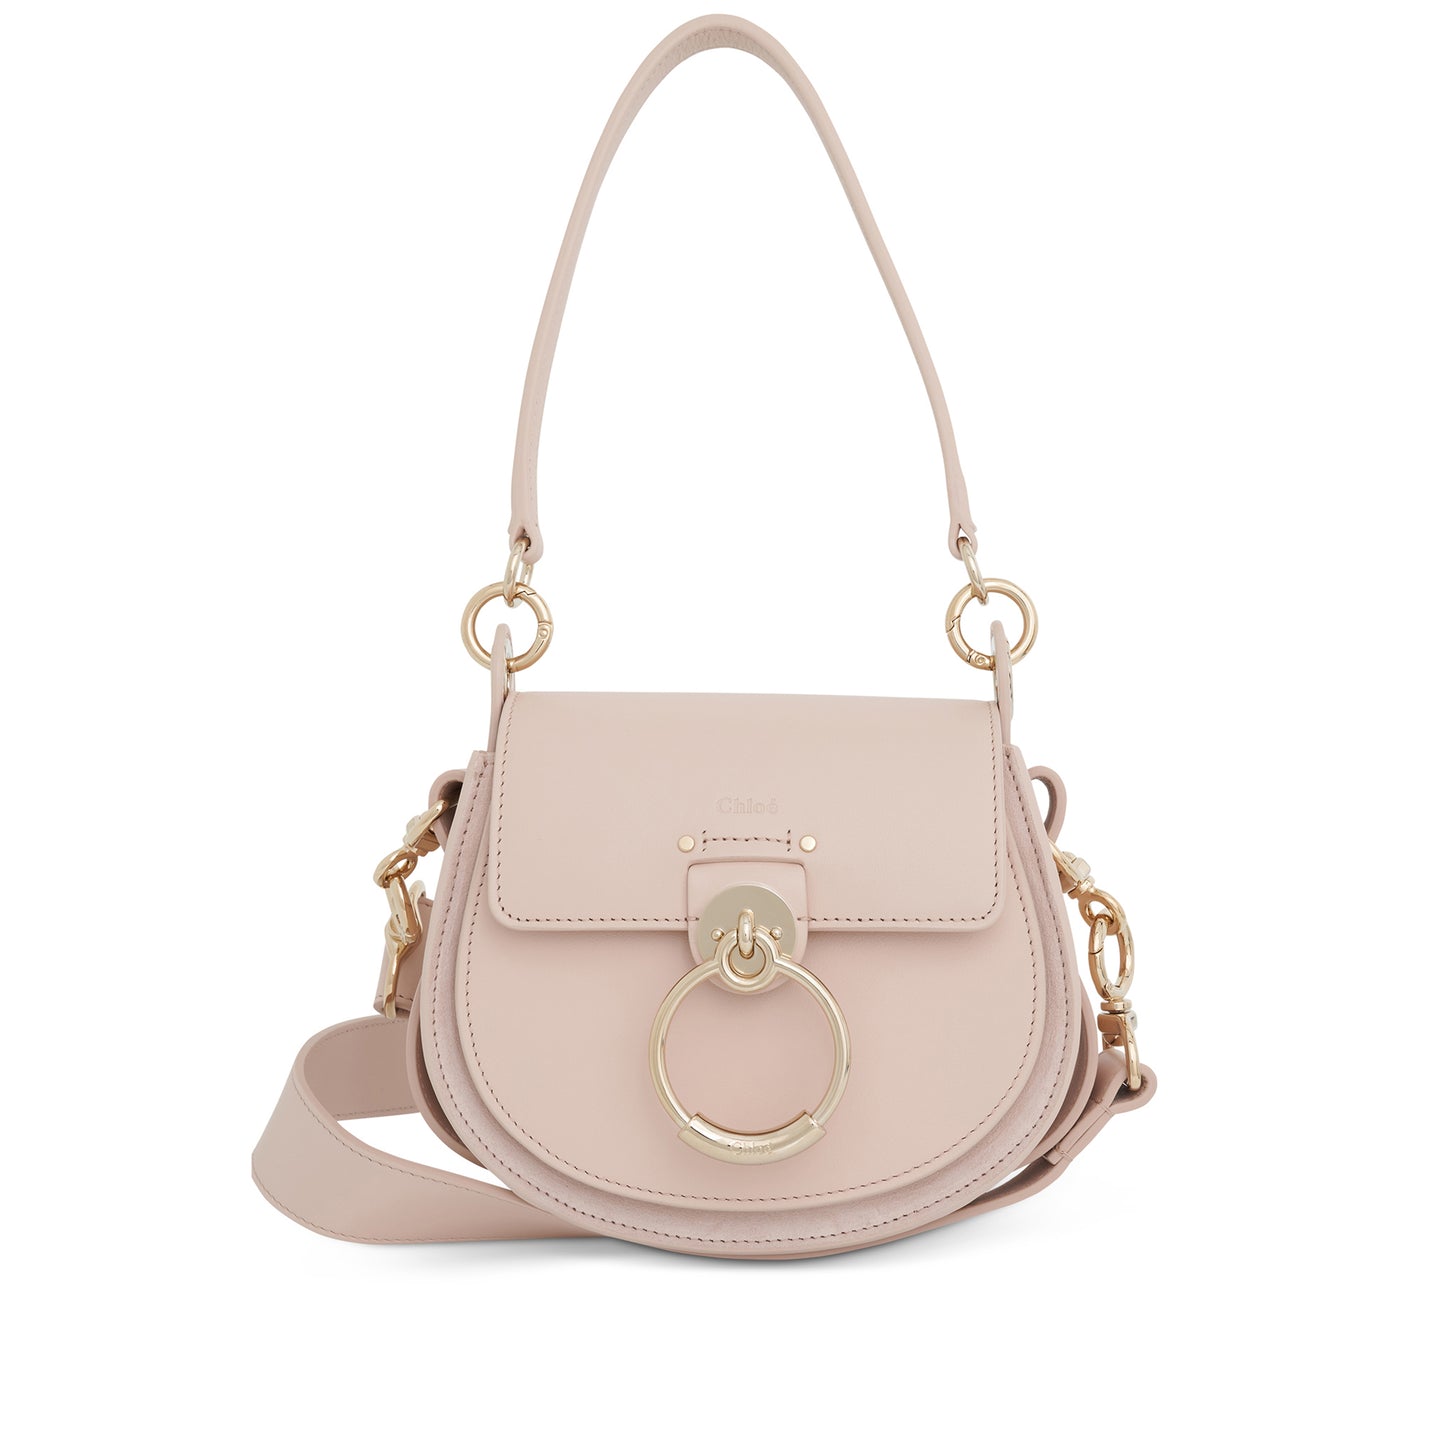 Tess Small Bag in Shiny and Suede Calfskin in Cement Pink